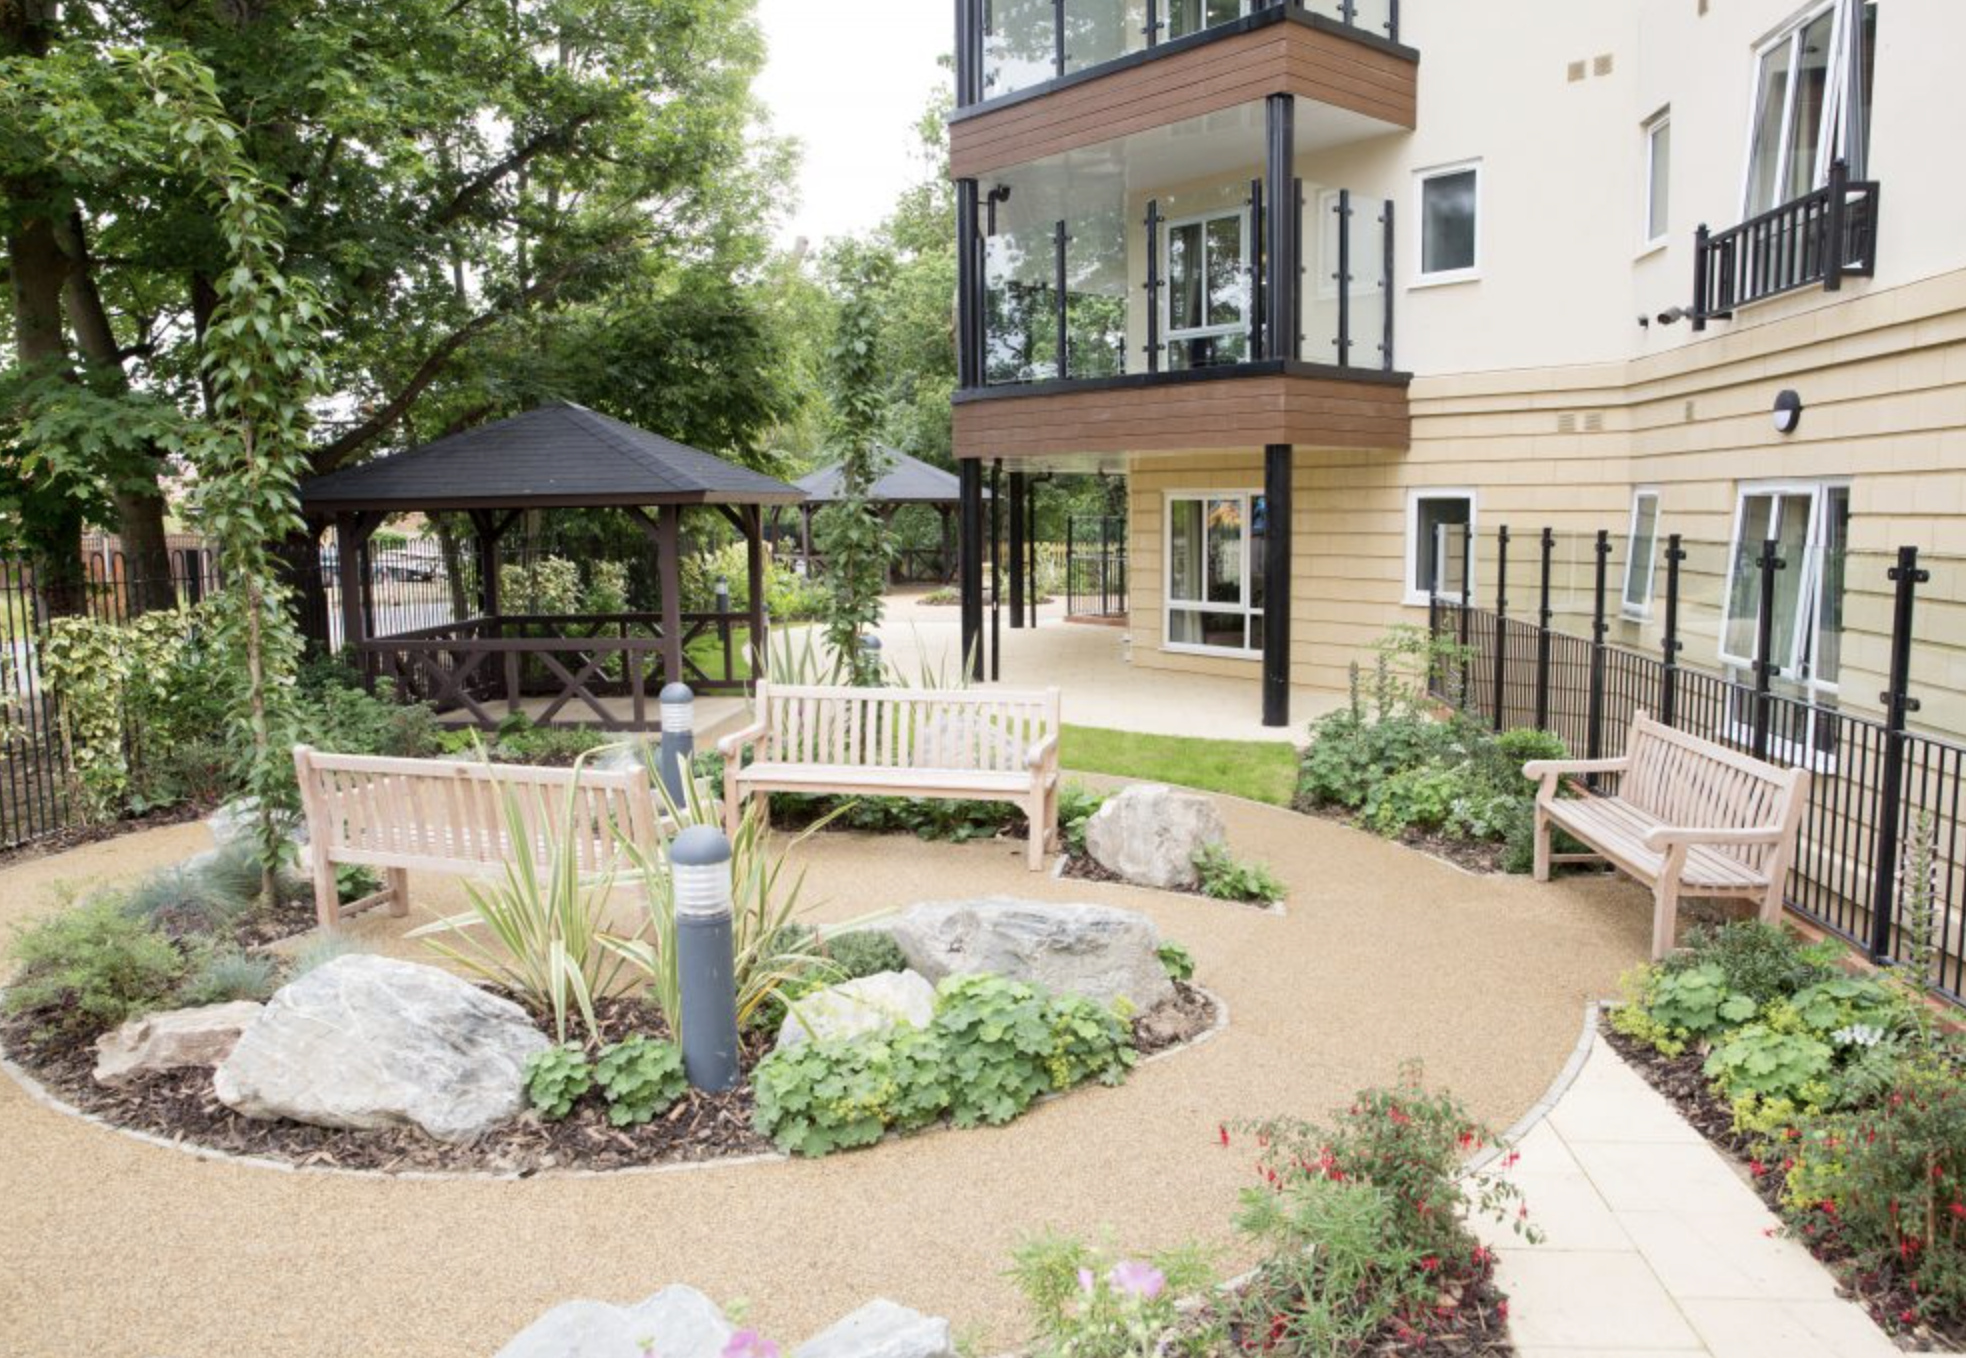 Garden of Cuffley Manor care home in Potters Bar, Hertfordshire